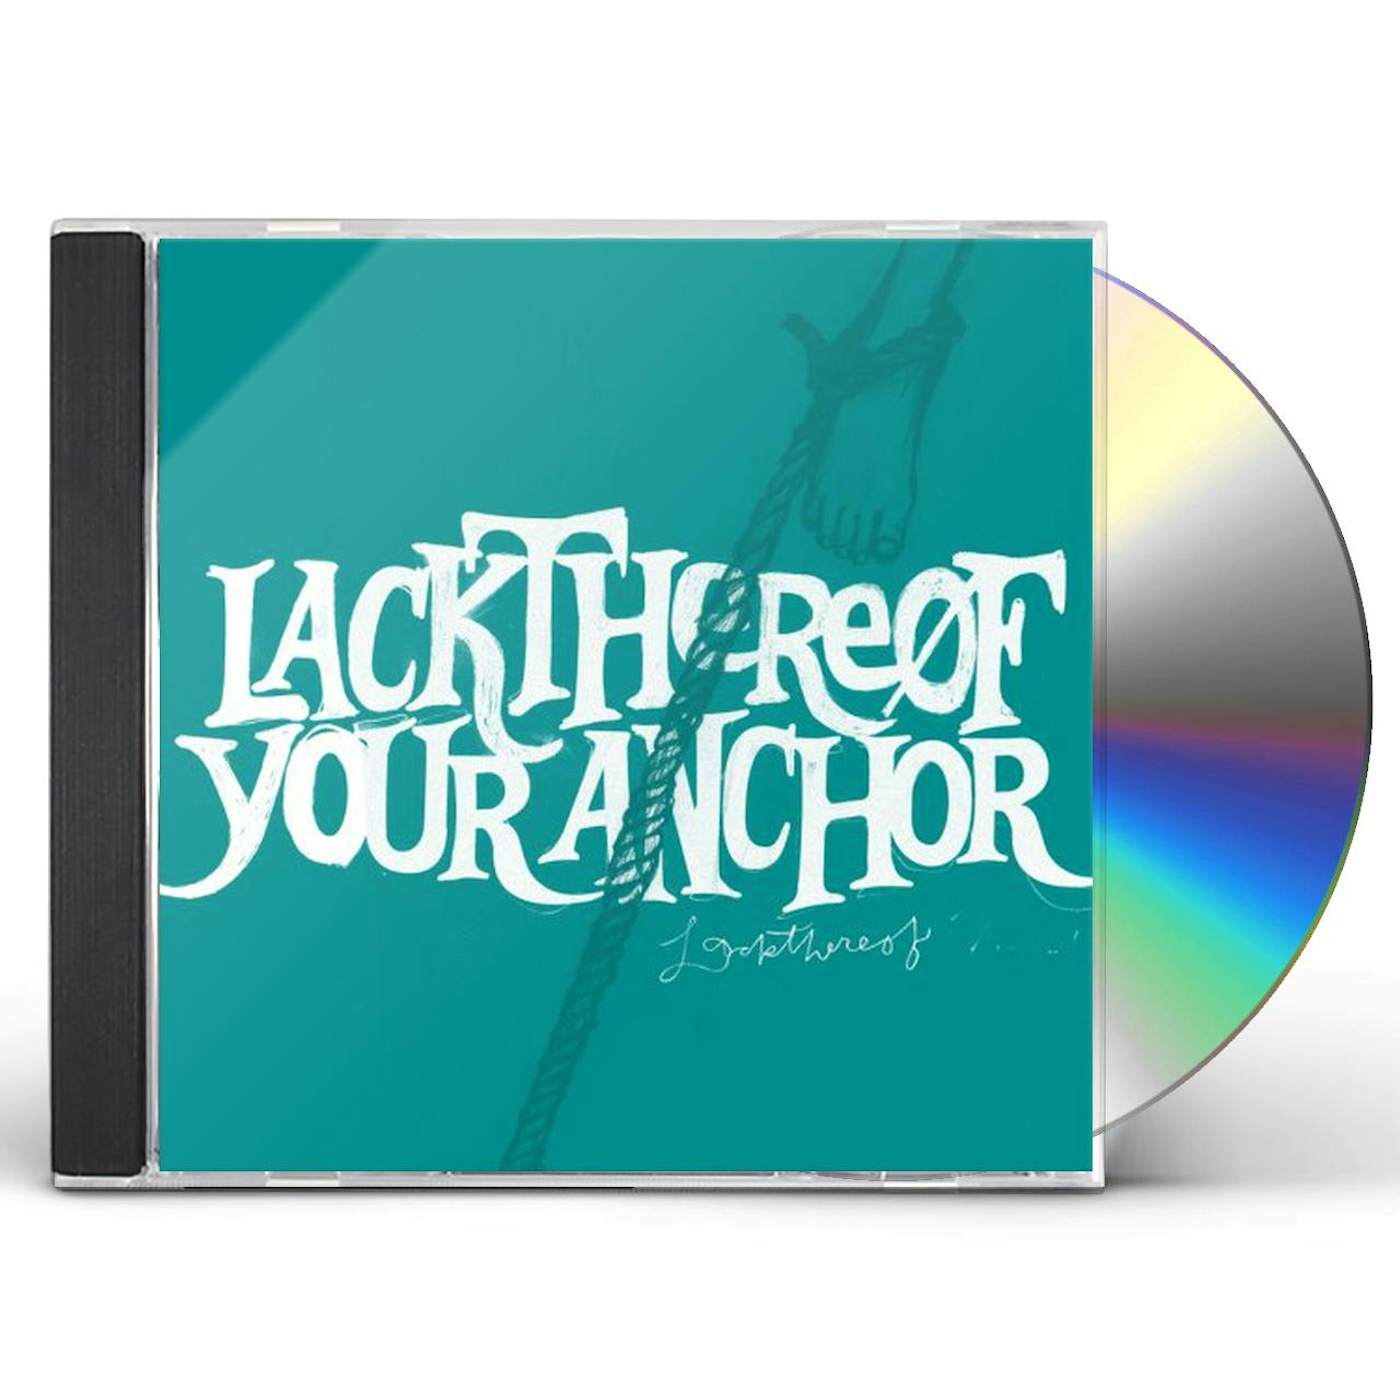 Lackthereof YOUR ANCHOR CD